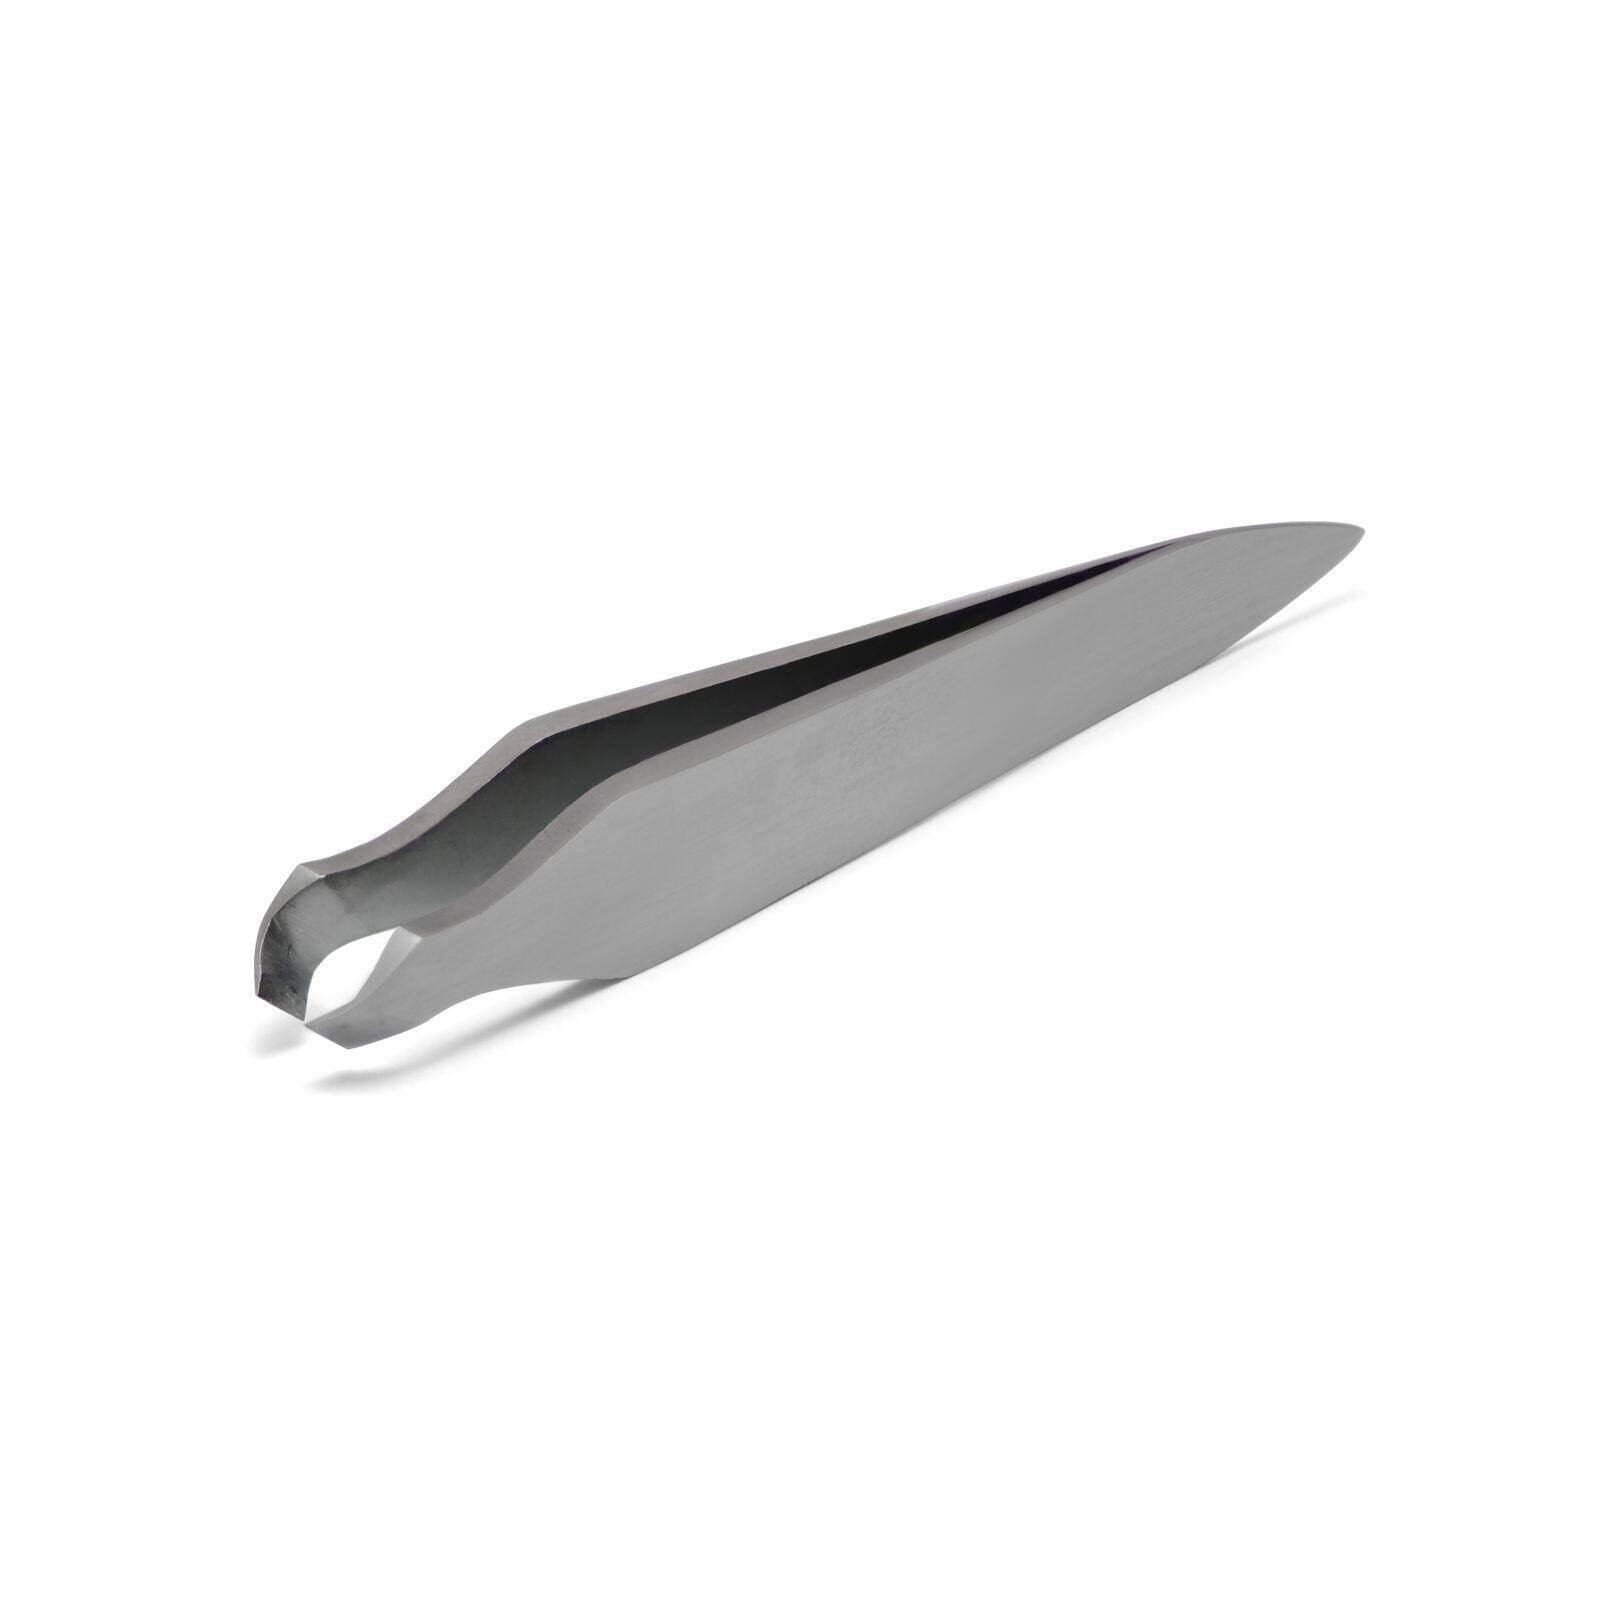 Tweezers a Shape, in Cuticle Nippers Stainless in (Germany) Store Steel, - Mont Made bleu 1525 Solingen